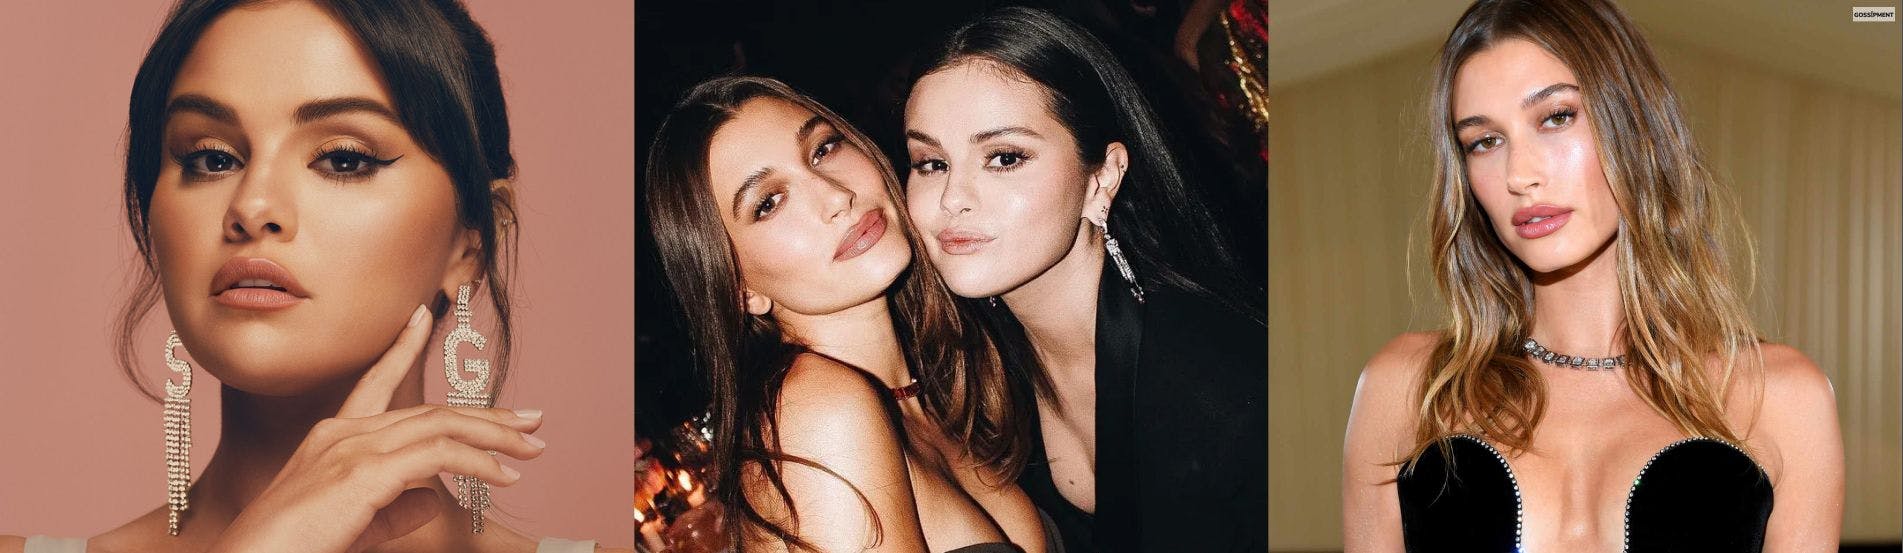 Cover Image for Selena Gomez And Hailey Bieber: A Complete Timeline Of Their TikTok Drama